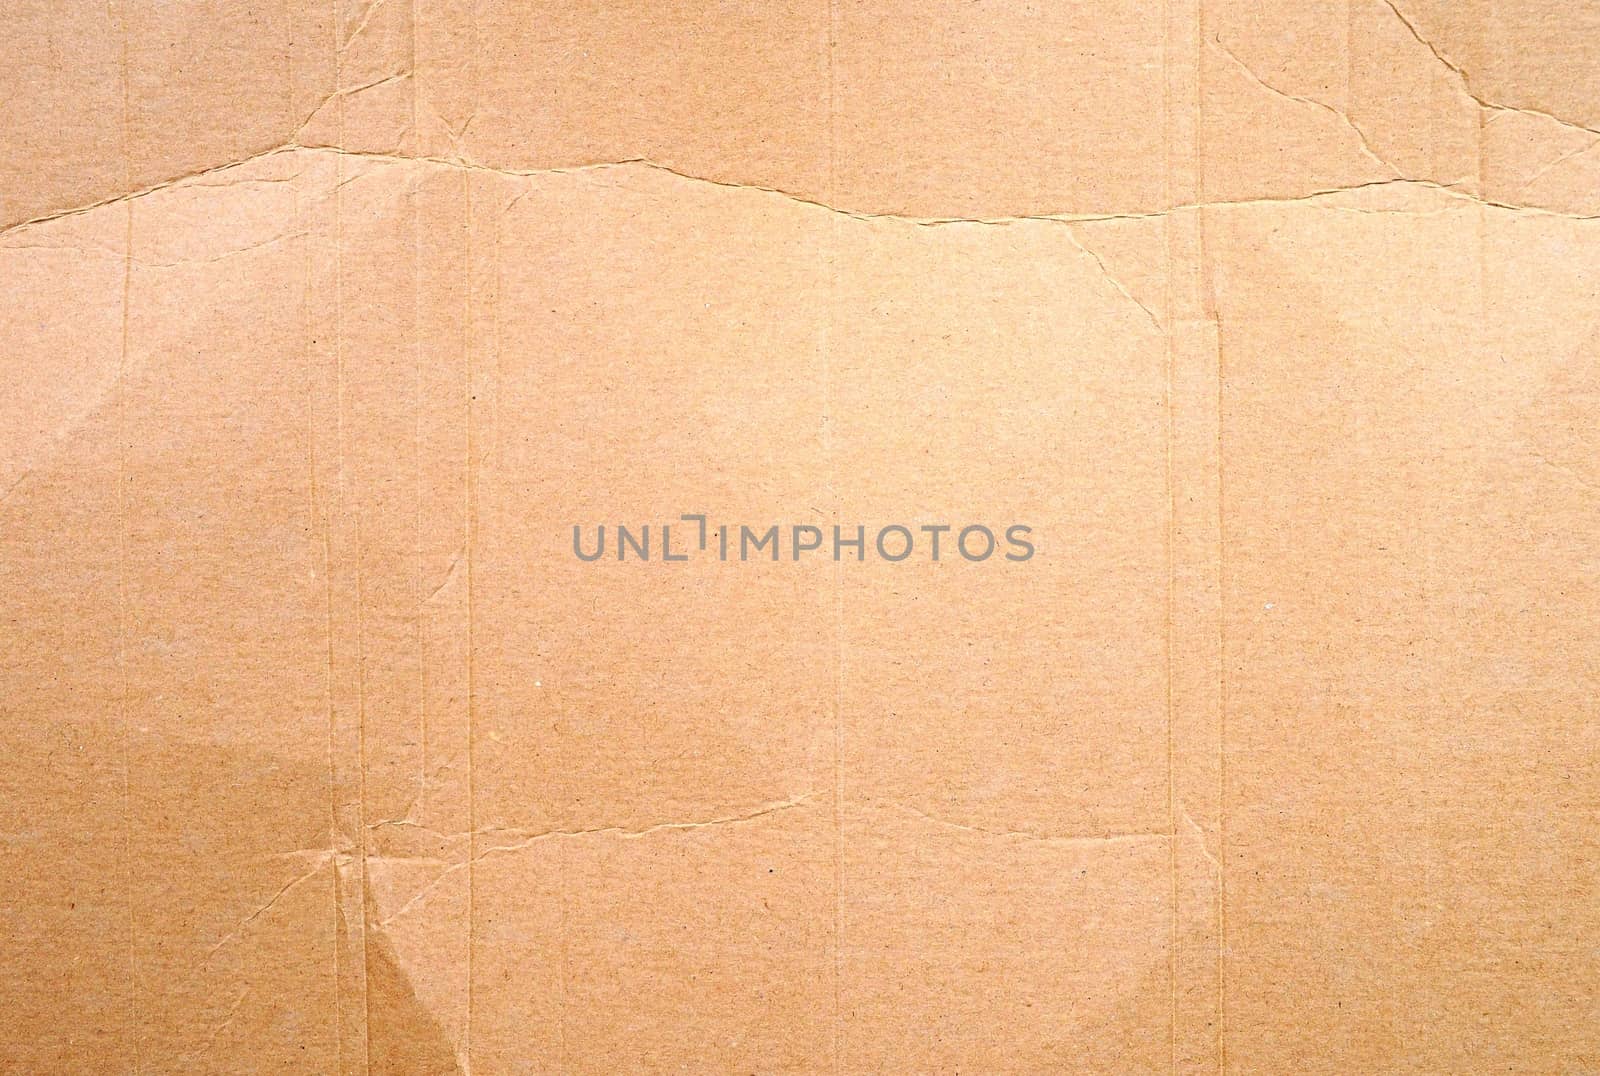 Full frame texture of blank crumpled and wrinkled brown cardboard background.